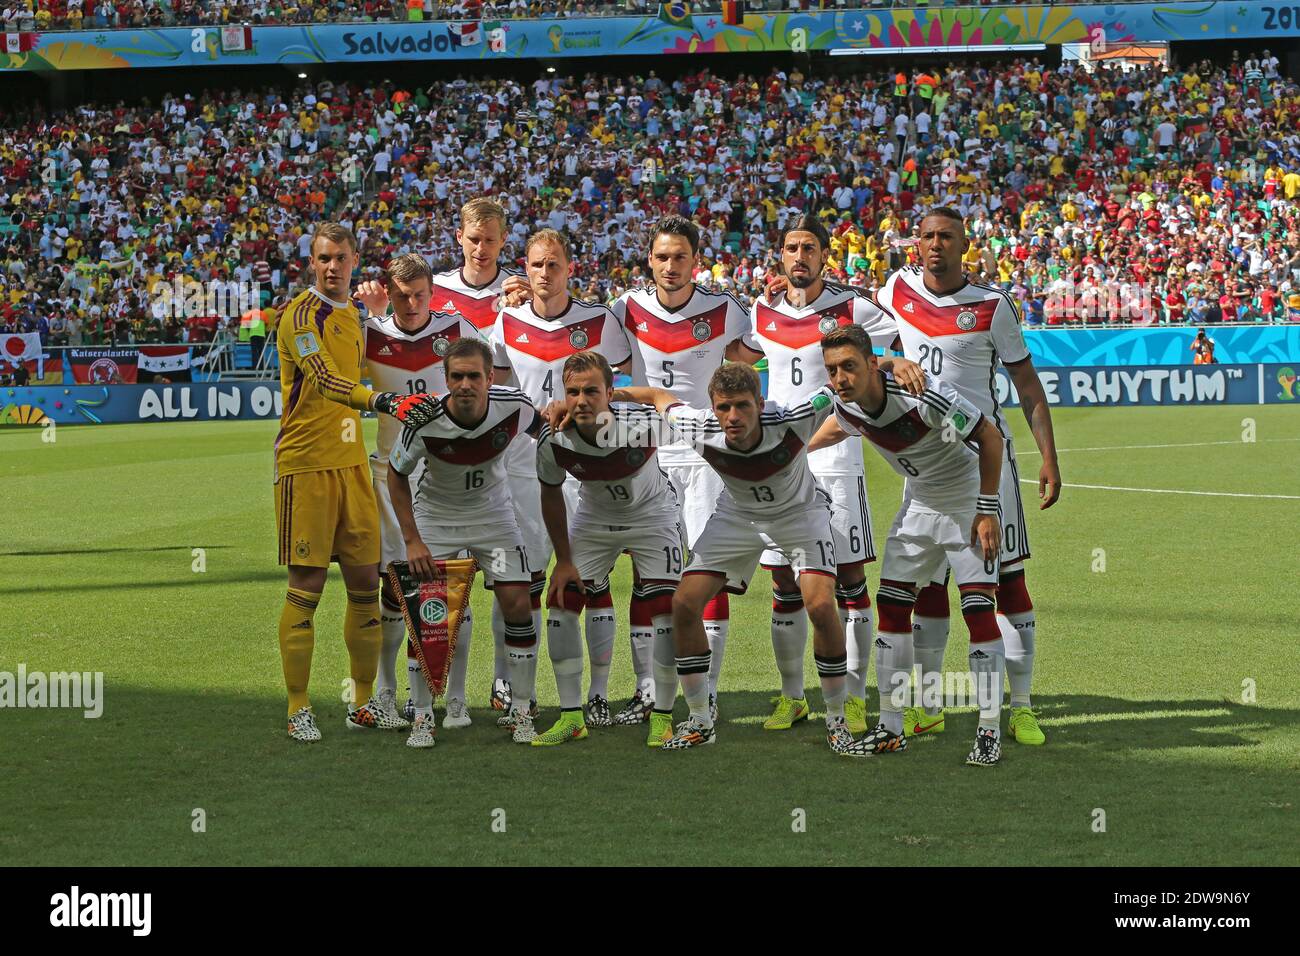 Team Of Germany Standing From Left: Neuer, Kroos, Mertesacker, Hoewedes, Hummel, Khedira, Boateng Down From Left: Lahm, Goetze, Mueller, Oezil during the FIFA World Cup Brazil 2014 Match Germany vs Portugal in Salvador de Baia, Brazil on June 16, 2014. Photo by Giuliano Bevilacqua/ABACAPRESS.COM Stock Photo